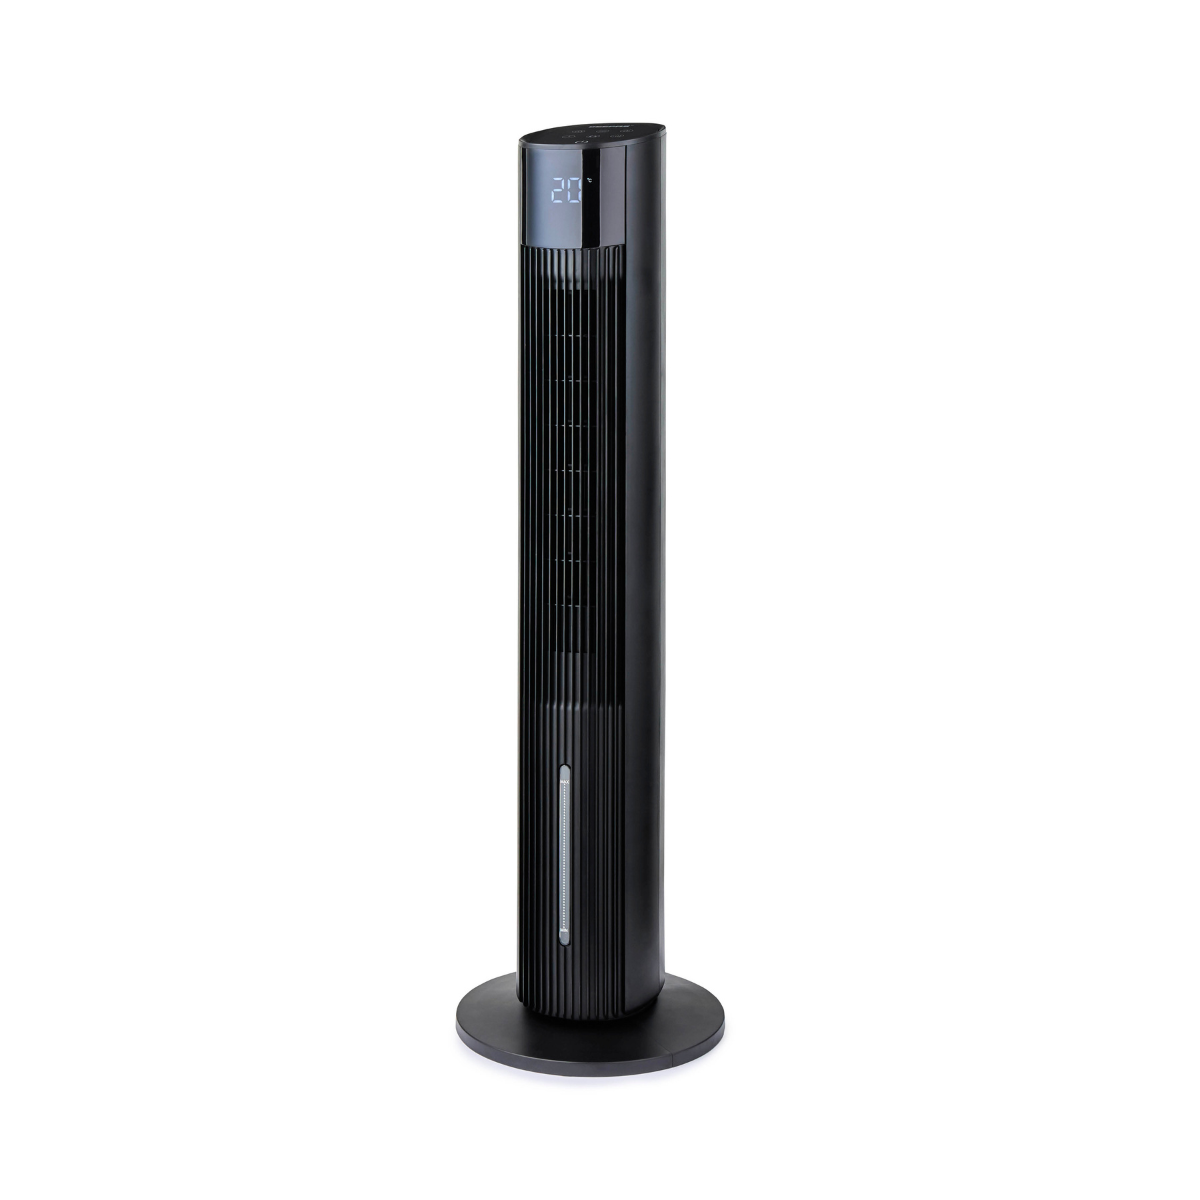 3-In-1 Air Cooler, Tower Fan and Humidifier In Black